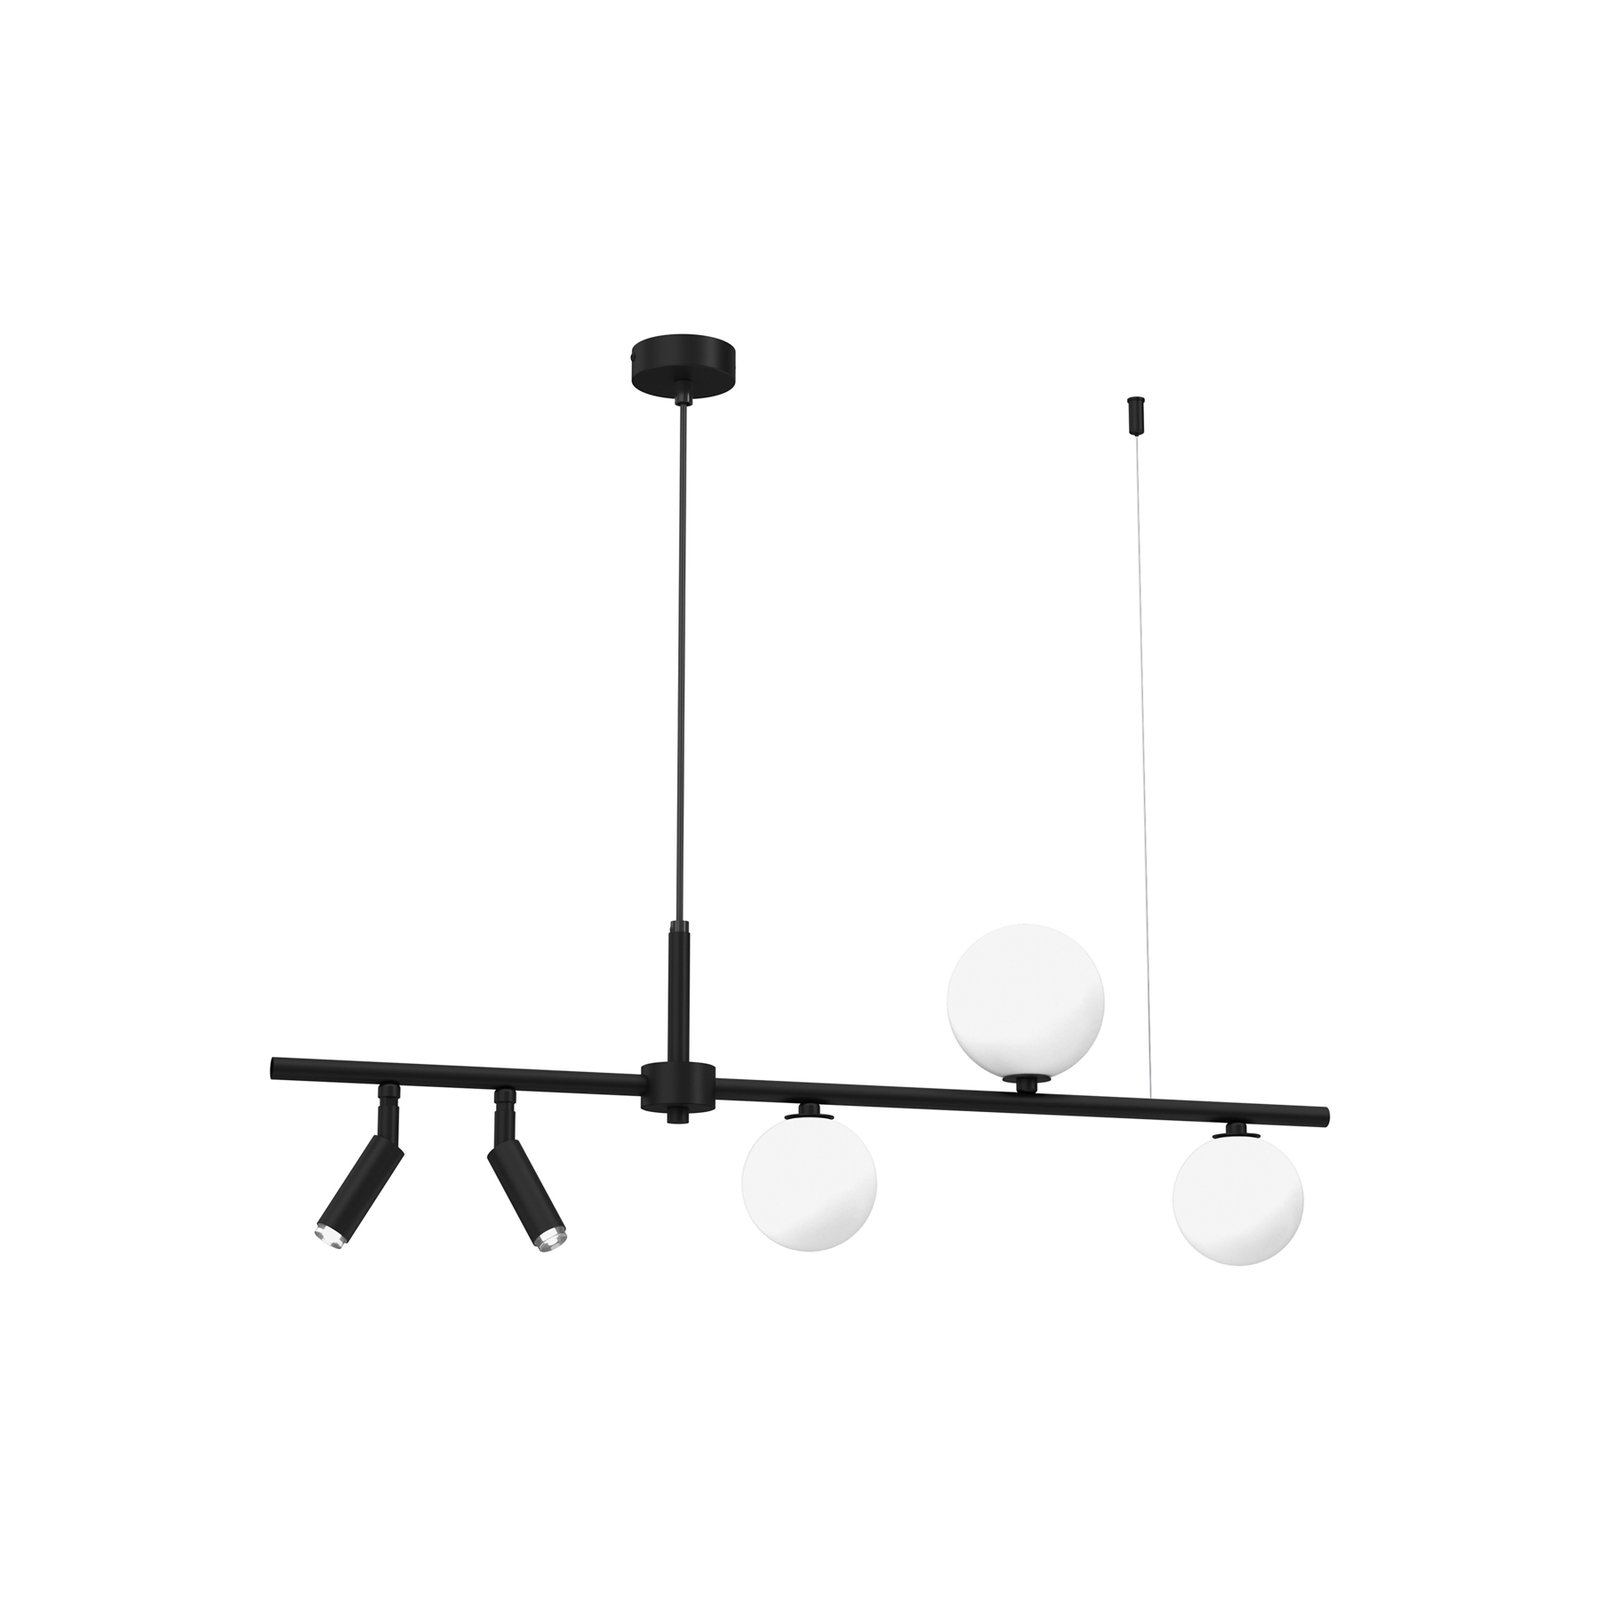 Sirio hanging light with movable spots, 5-bulb